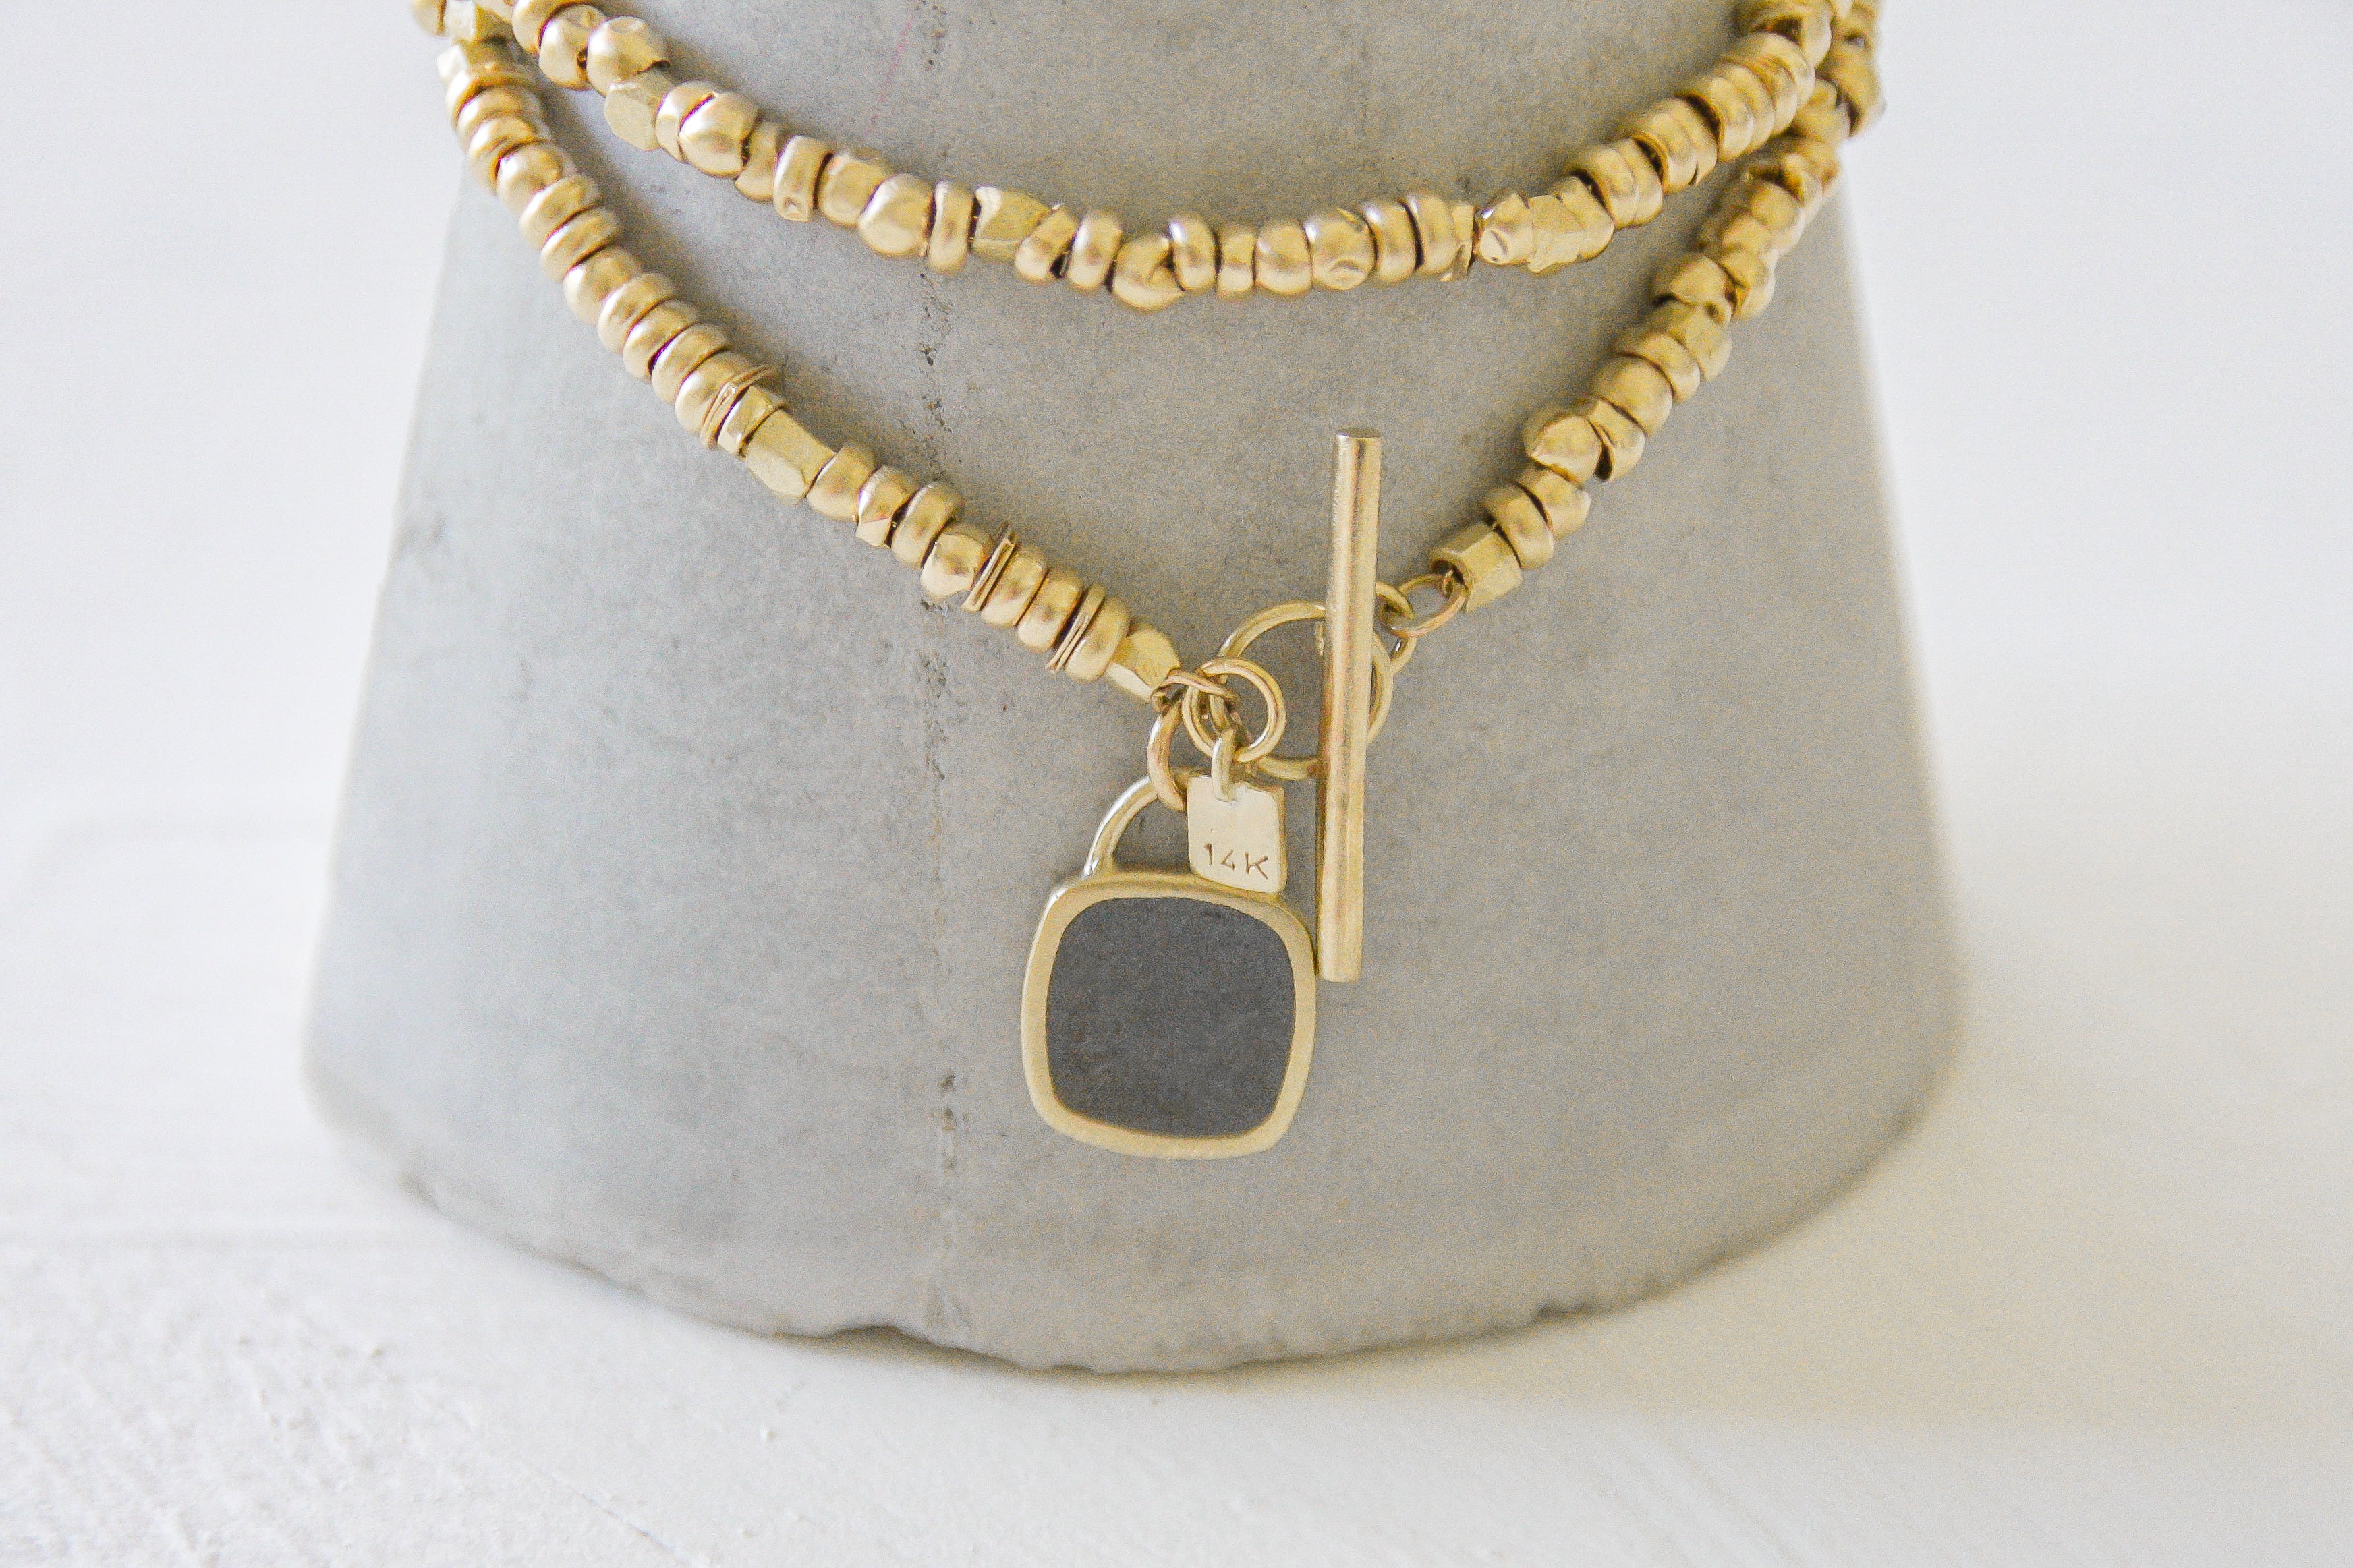 Gold beads necklace with a gold & concrete charm